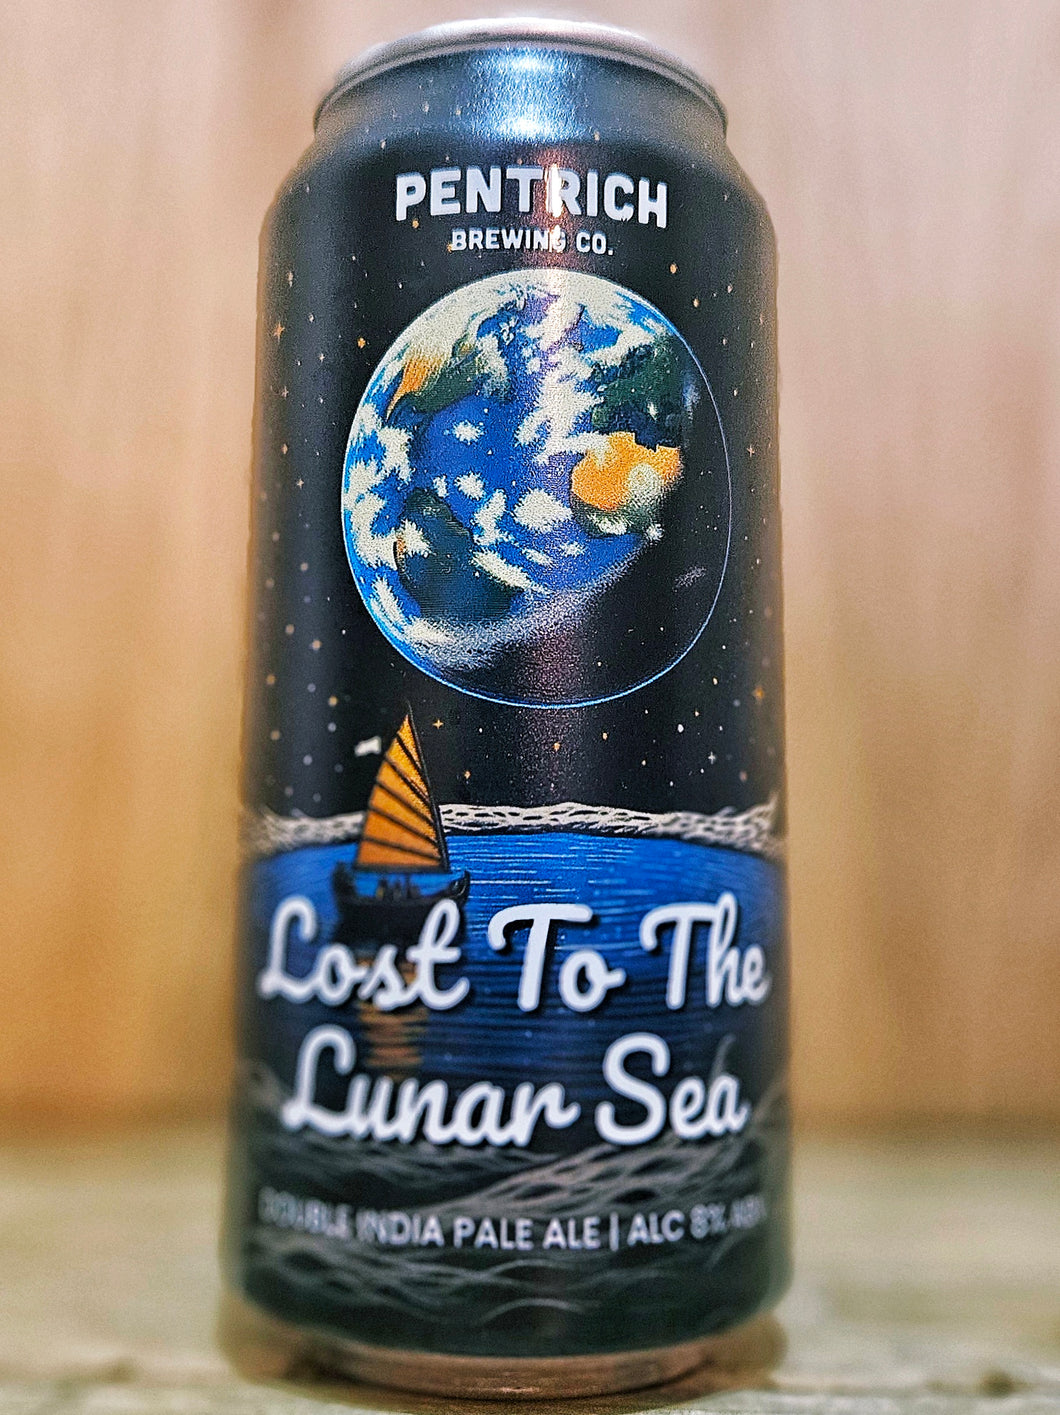 Pentrich - Lost To The Lunar Sea